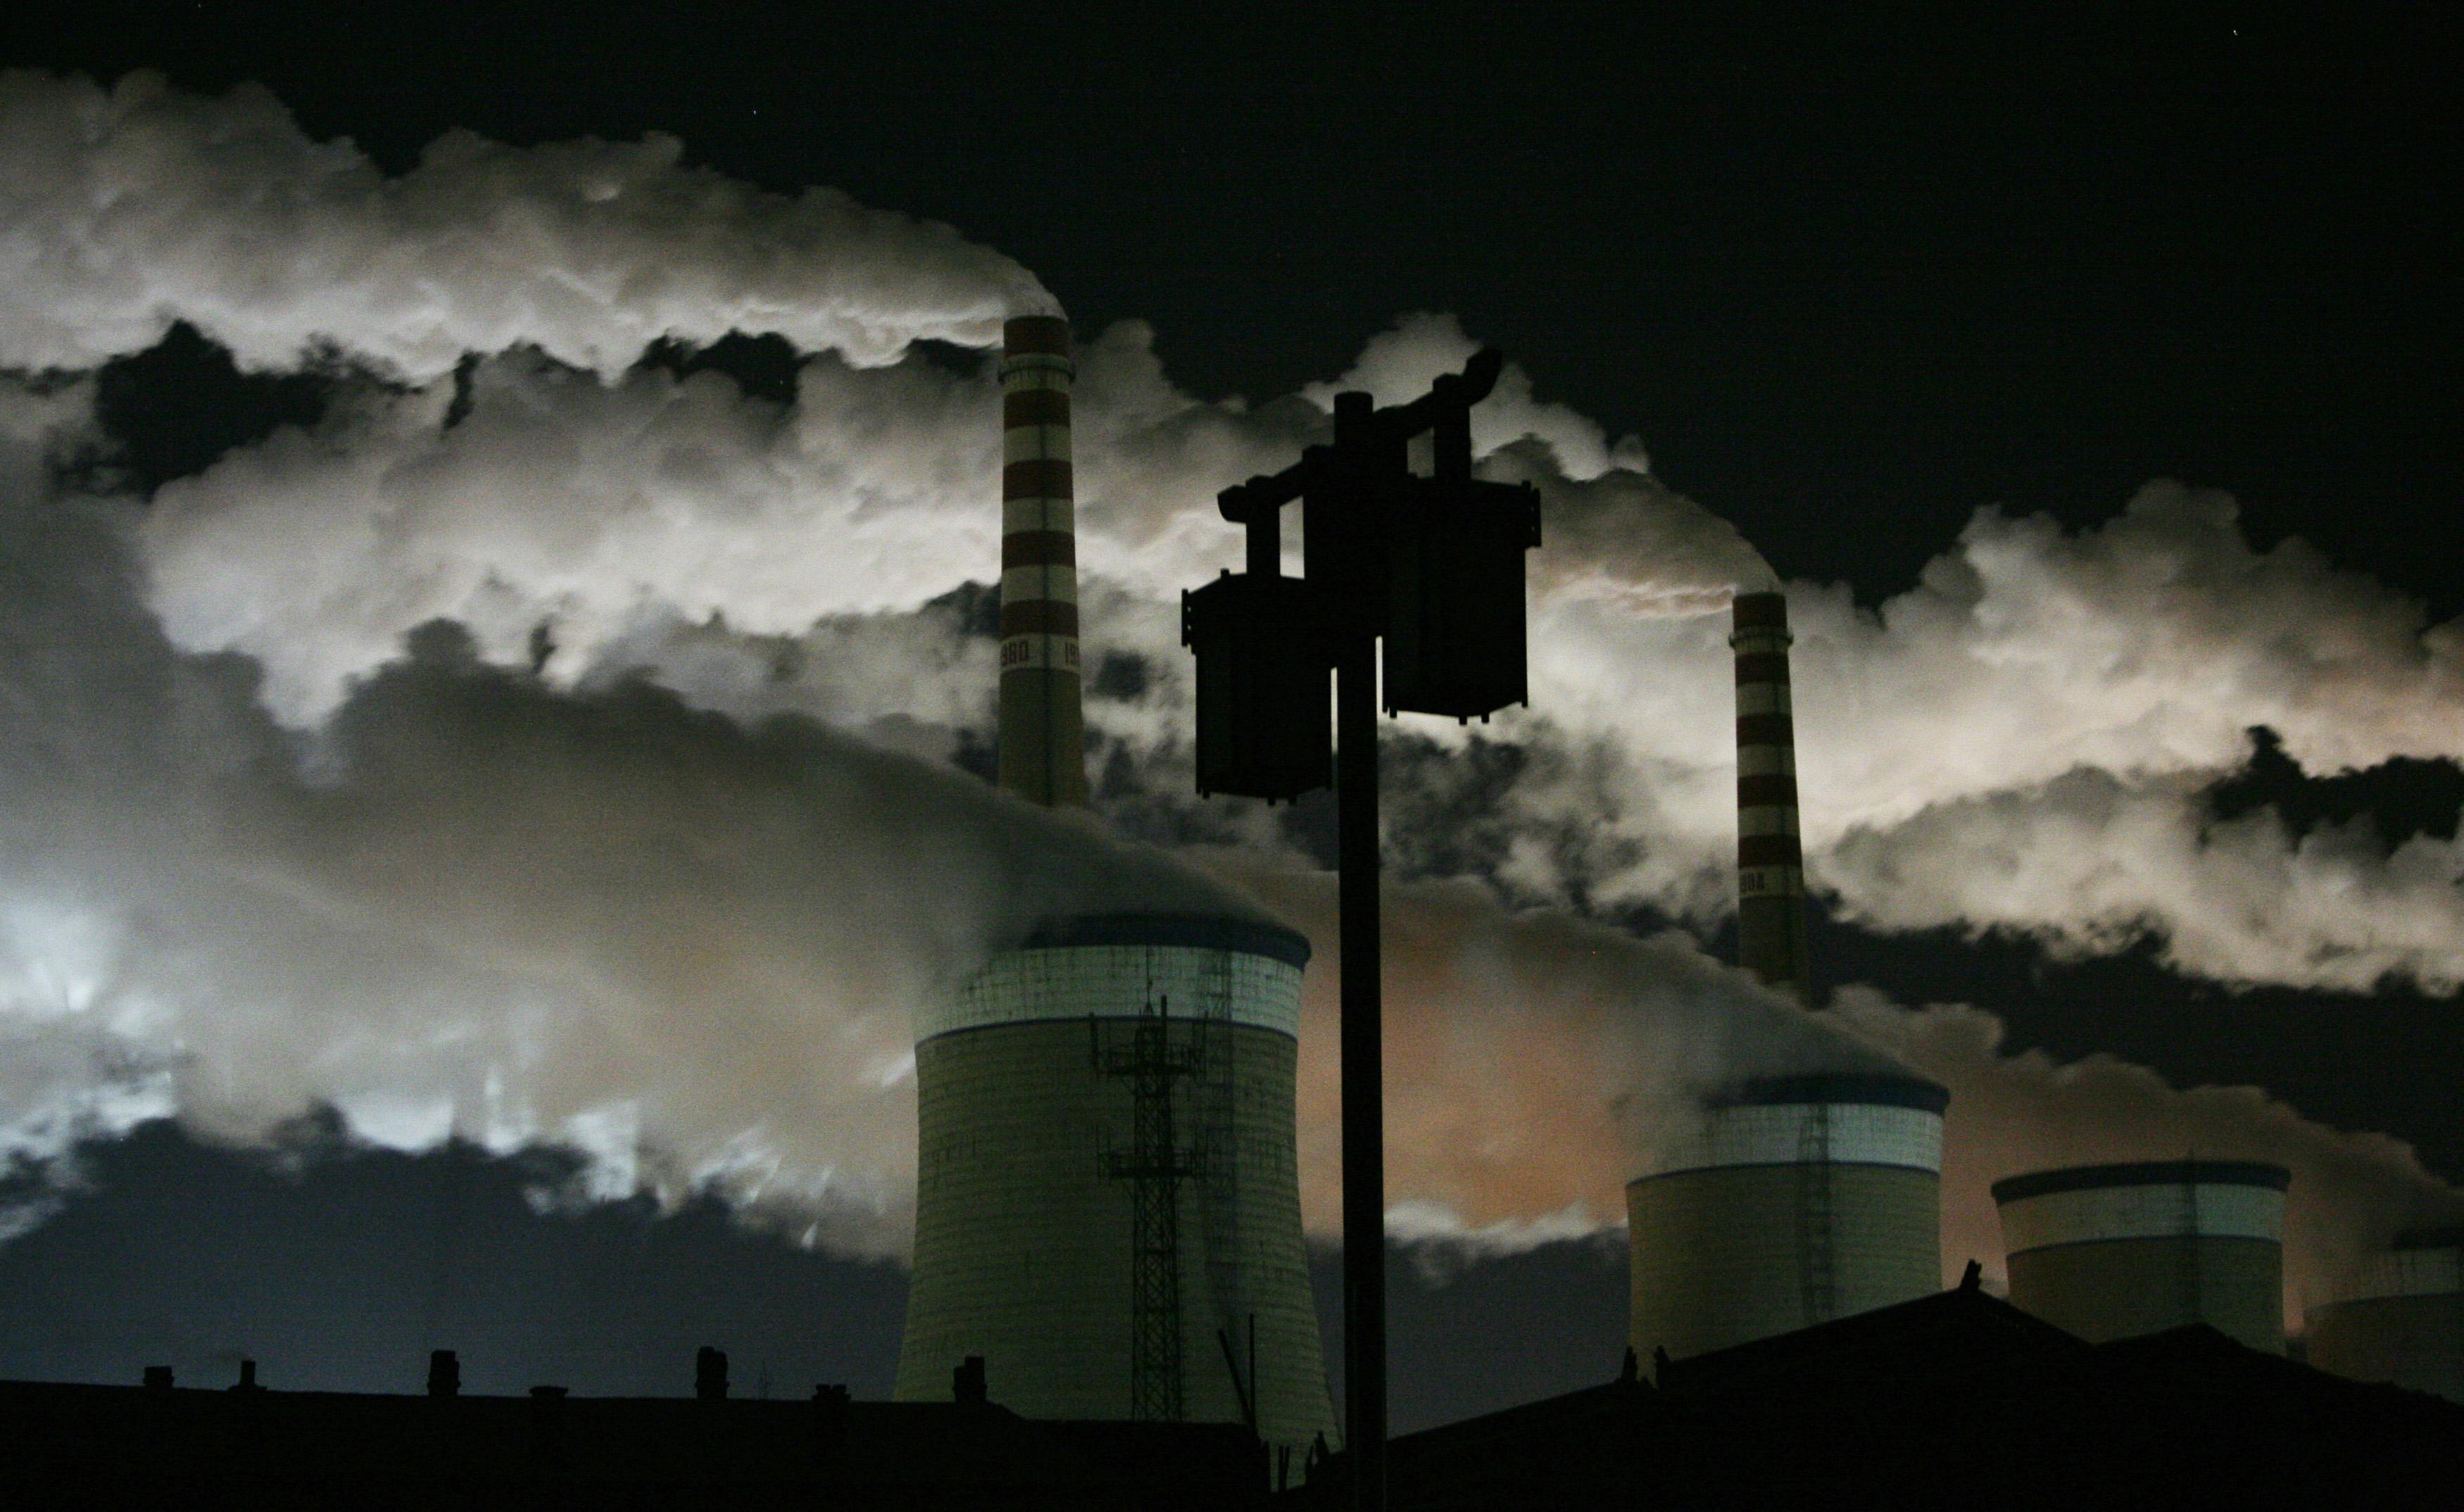 A street lamp is seen in front of Datong's second coal-fired power plant at night on the outskirts of Datong, Shanxi province, in this November 20,2009 file photo. World carbon dioxide emissions will hit a record high this year, driven by China's growth and keeping the world far off track from the deep cuts needed to limit climate change, the Global Carbon Project report by leading research institutes said on September 21, 2014. To match UN-CLIMATECHANGE-CARBON/ REUTERS/Jason Lee/Files (CHINA - Tags: ENERGY ENVIRONMENT POLITICS)